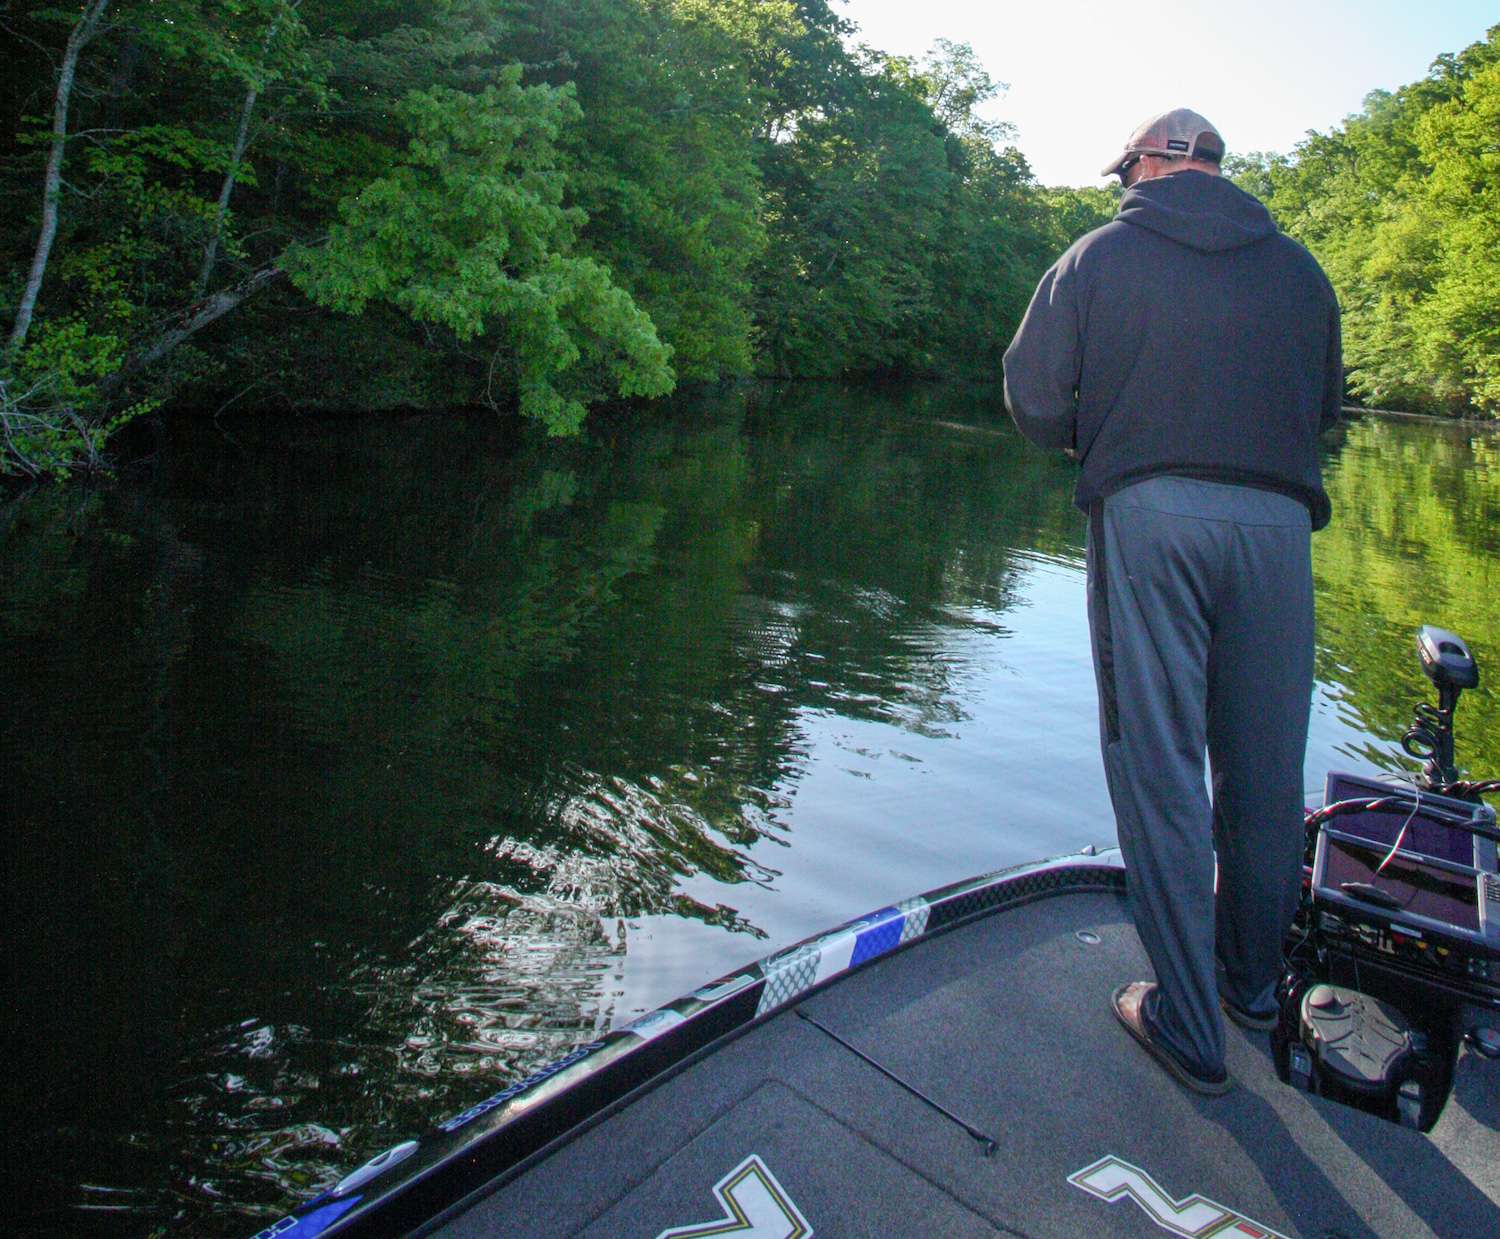 <b>8:08 a.m.</b> He switches to the brush hog and catches a 10-inch bass. âThat fish was right on the dropoff.â
